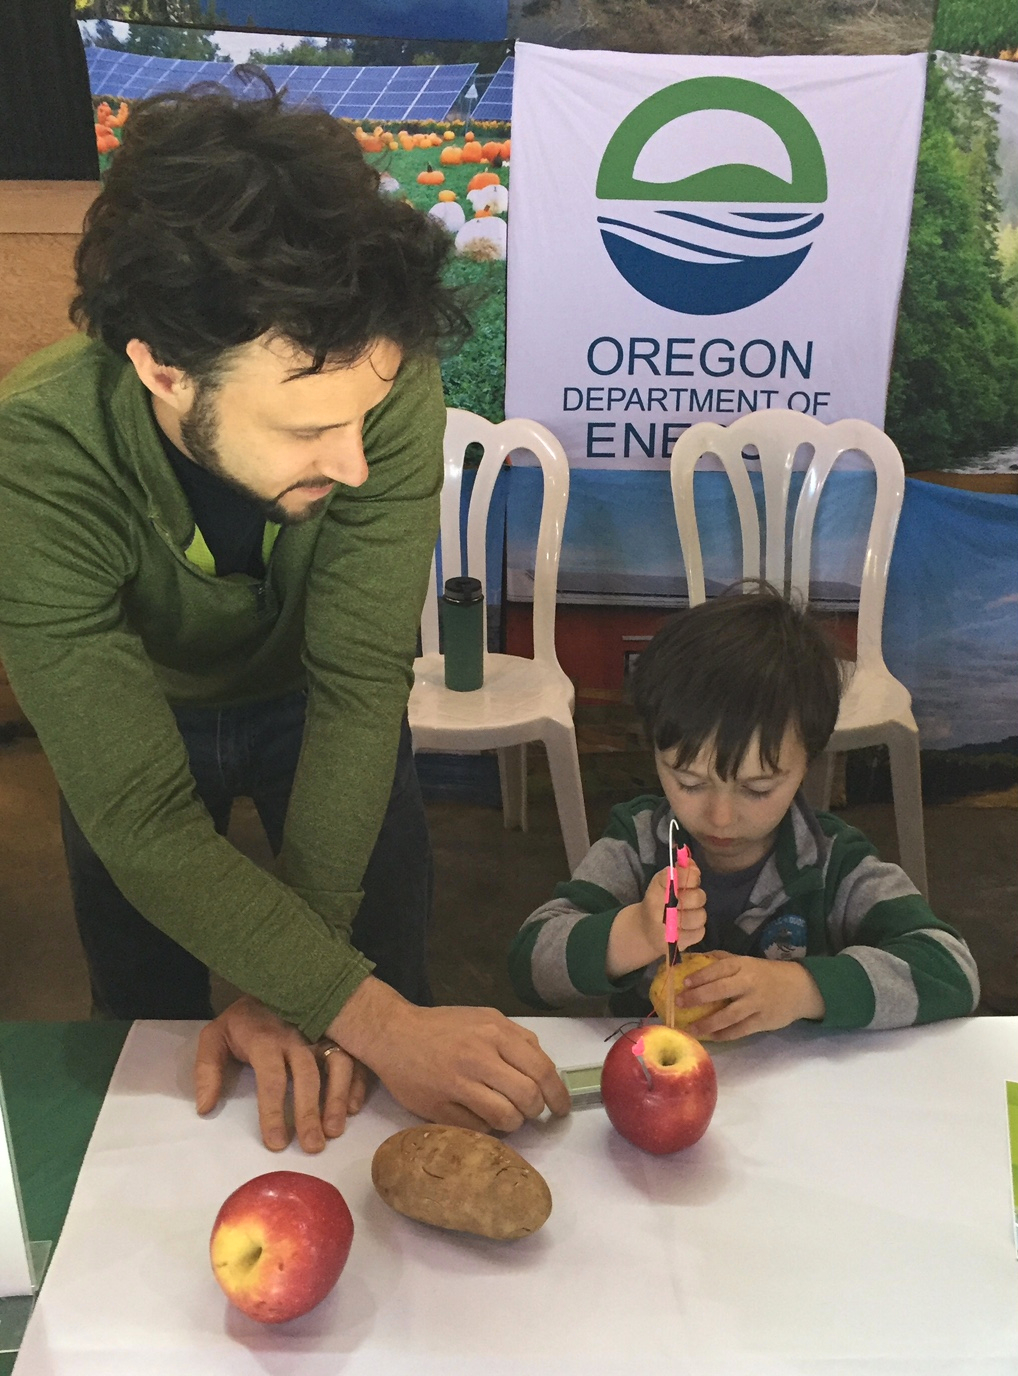  During an Earth Day event at the Oregon Garden in  Silverton , ODOE Engineer Blake Shelide showed a young boy how to create an electric current using fruits and vegetables.     